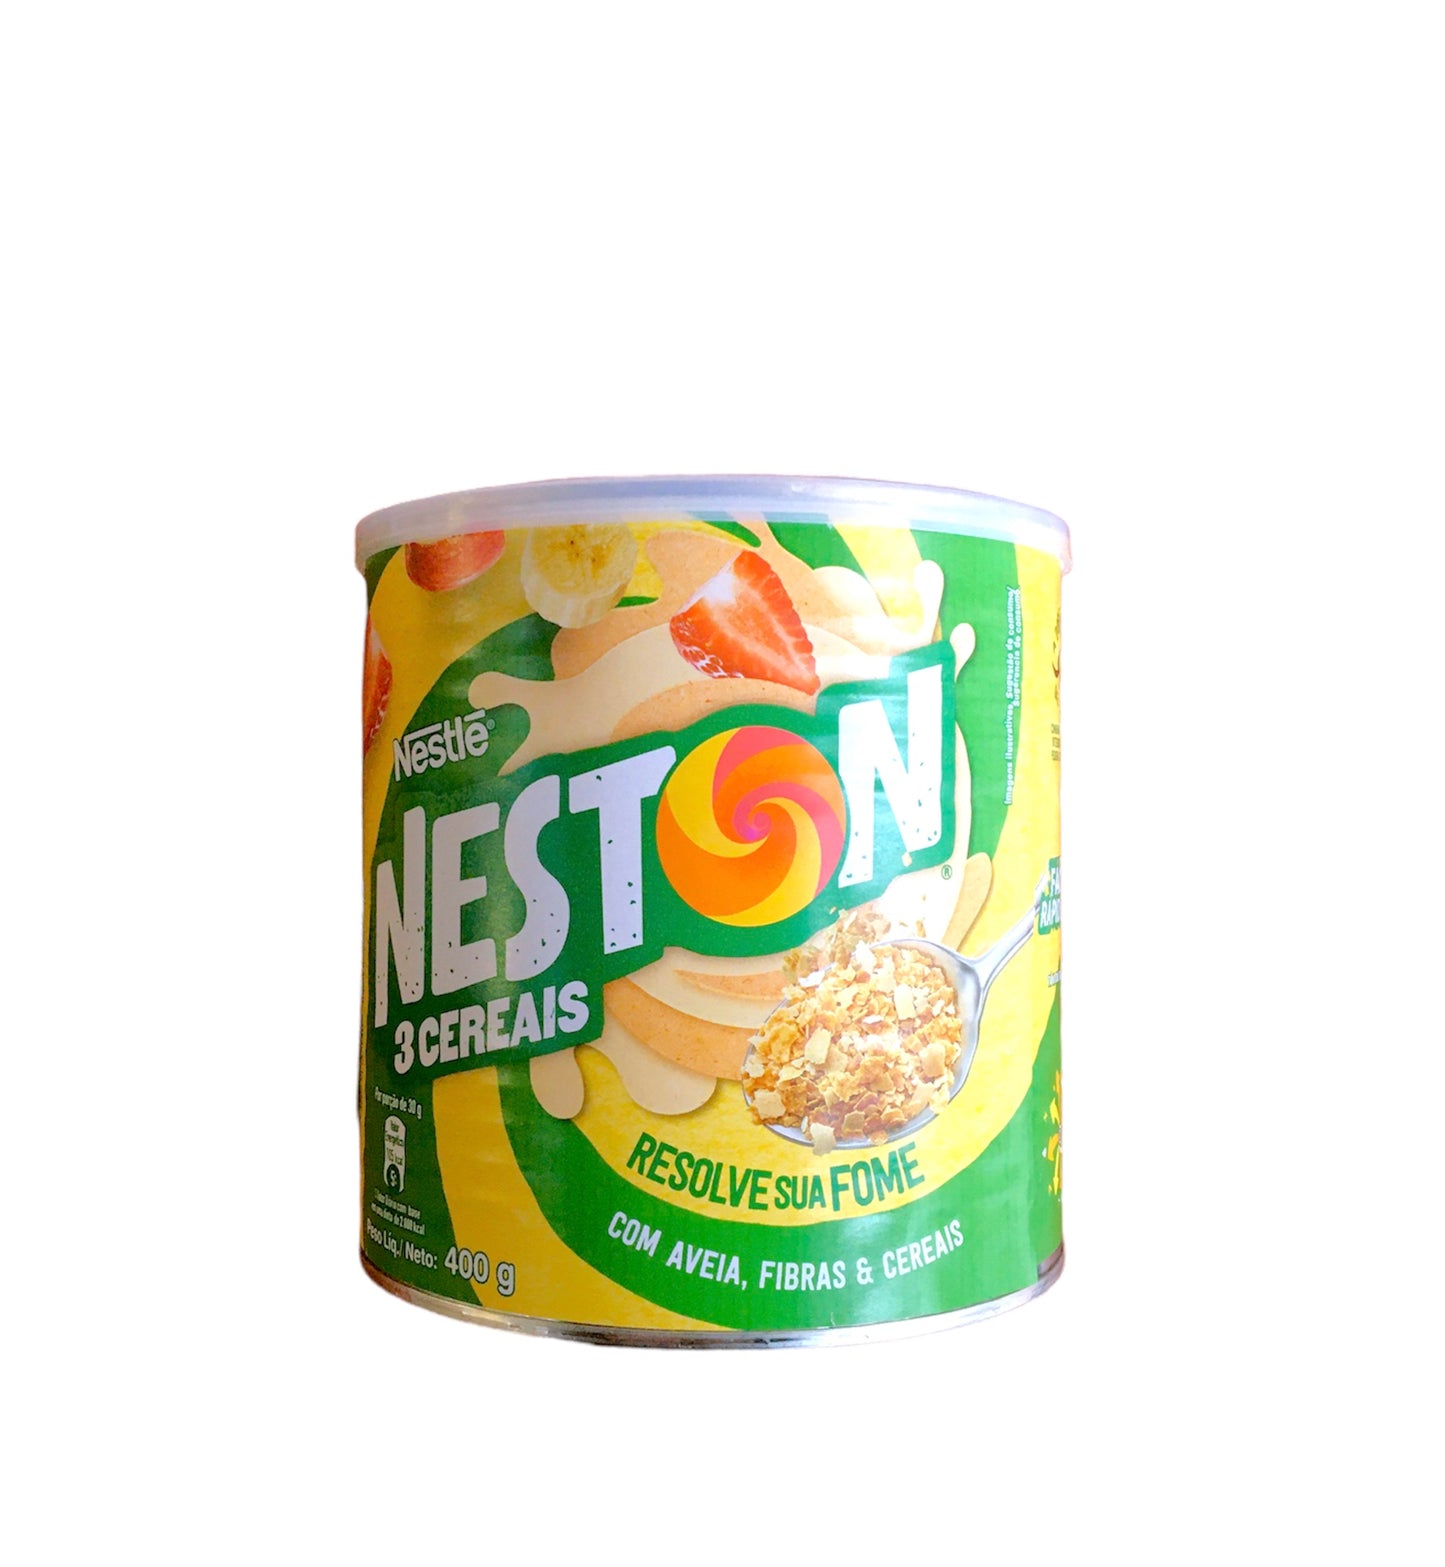 Nestle Baby Cereal Oats, Fiber and Cereals | Neston 3 cereais lata